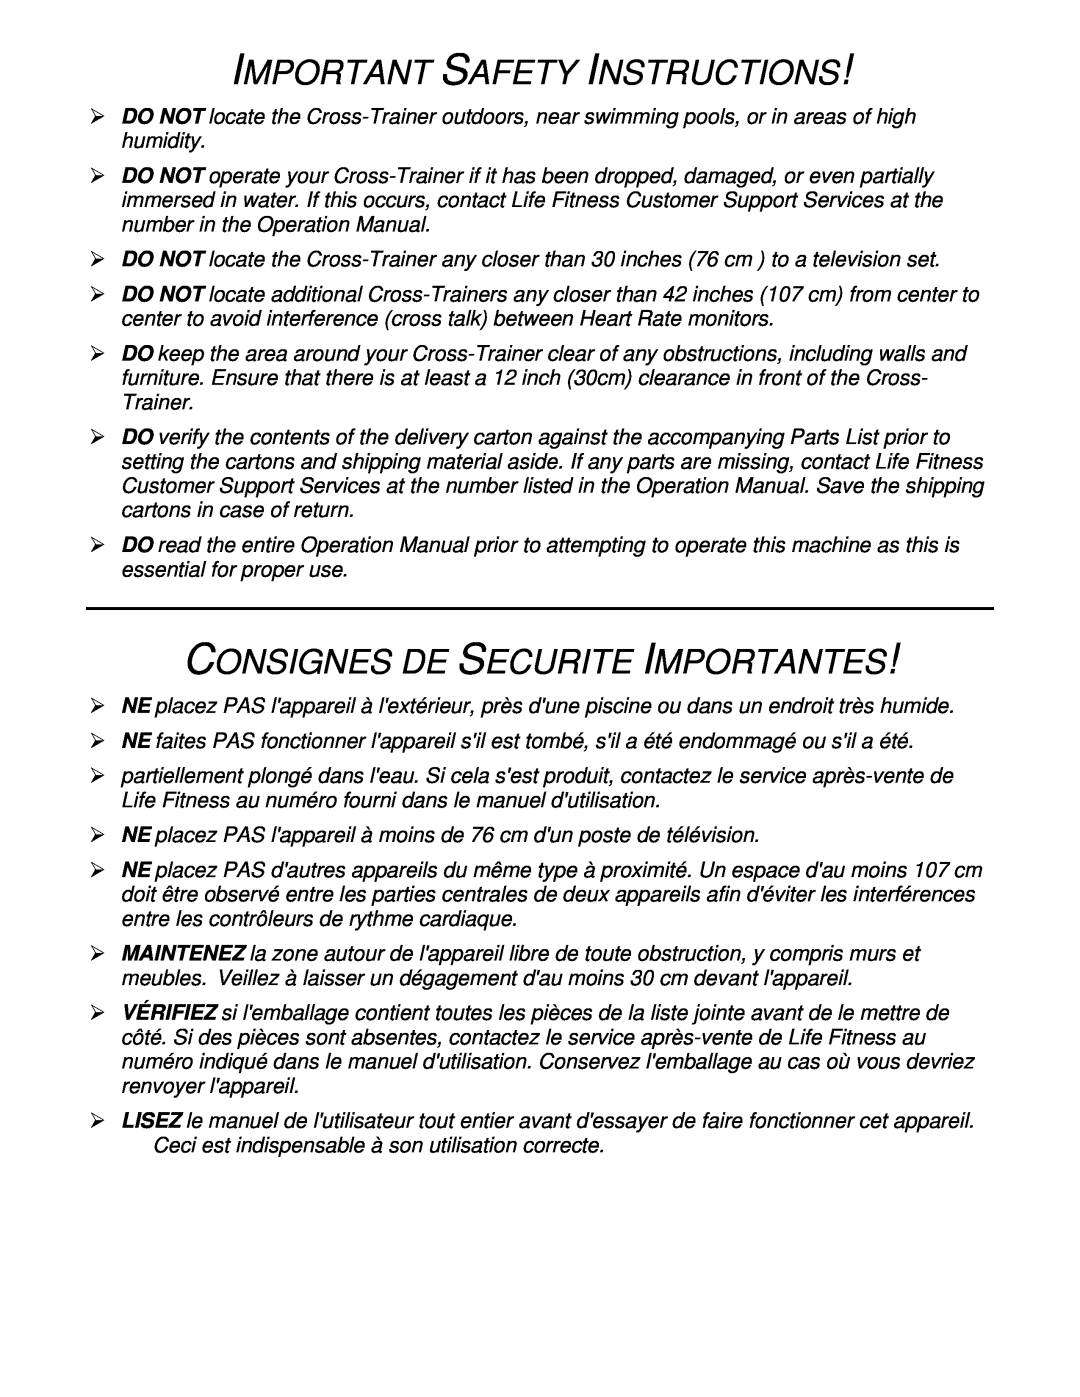 Life Fitness 95Xe manual Important Safety Instructions, Consignes De Securite Importantes 